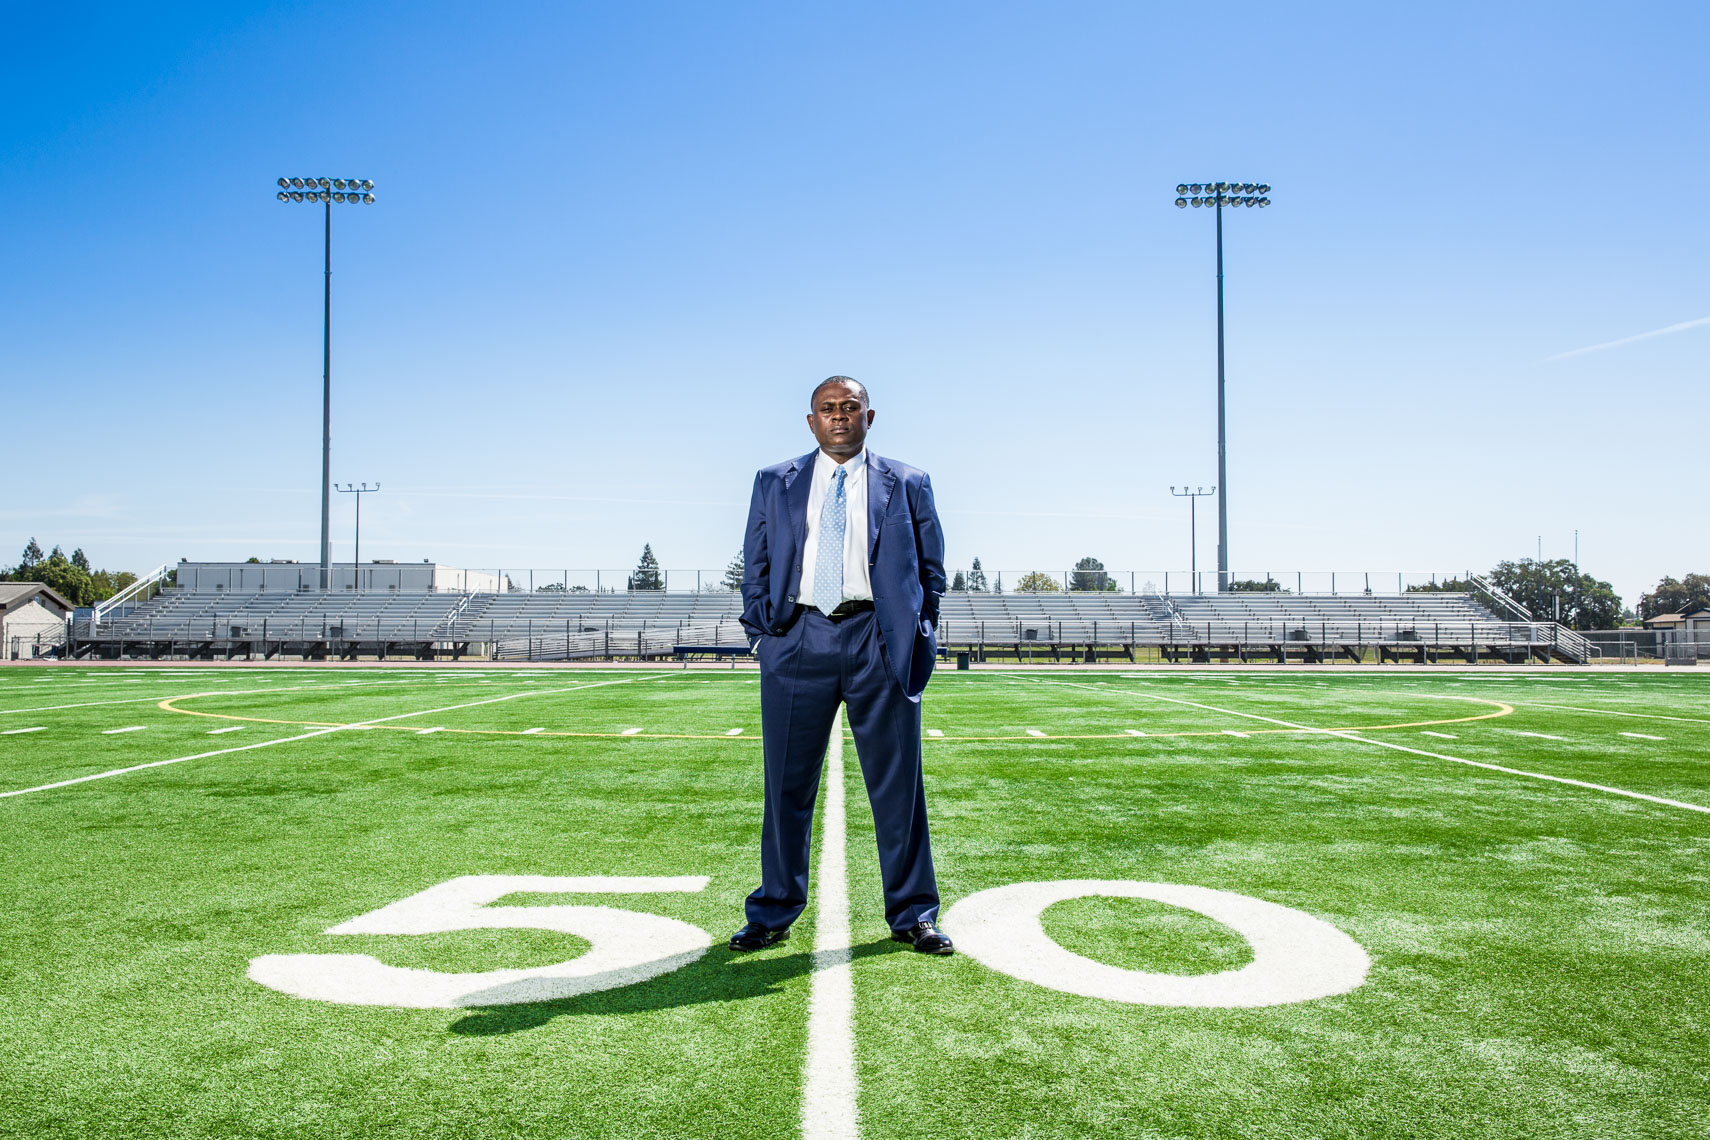 Dr. Bennet Omalu, Concussion doctor who took on the NFL, photographed on location by editorial photographer Robert Houser